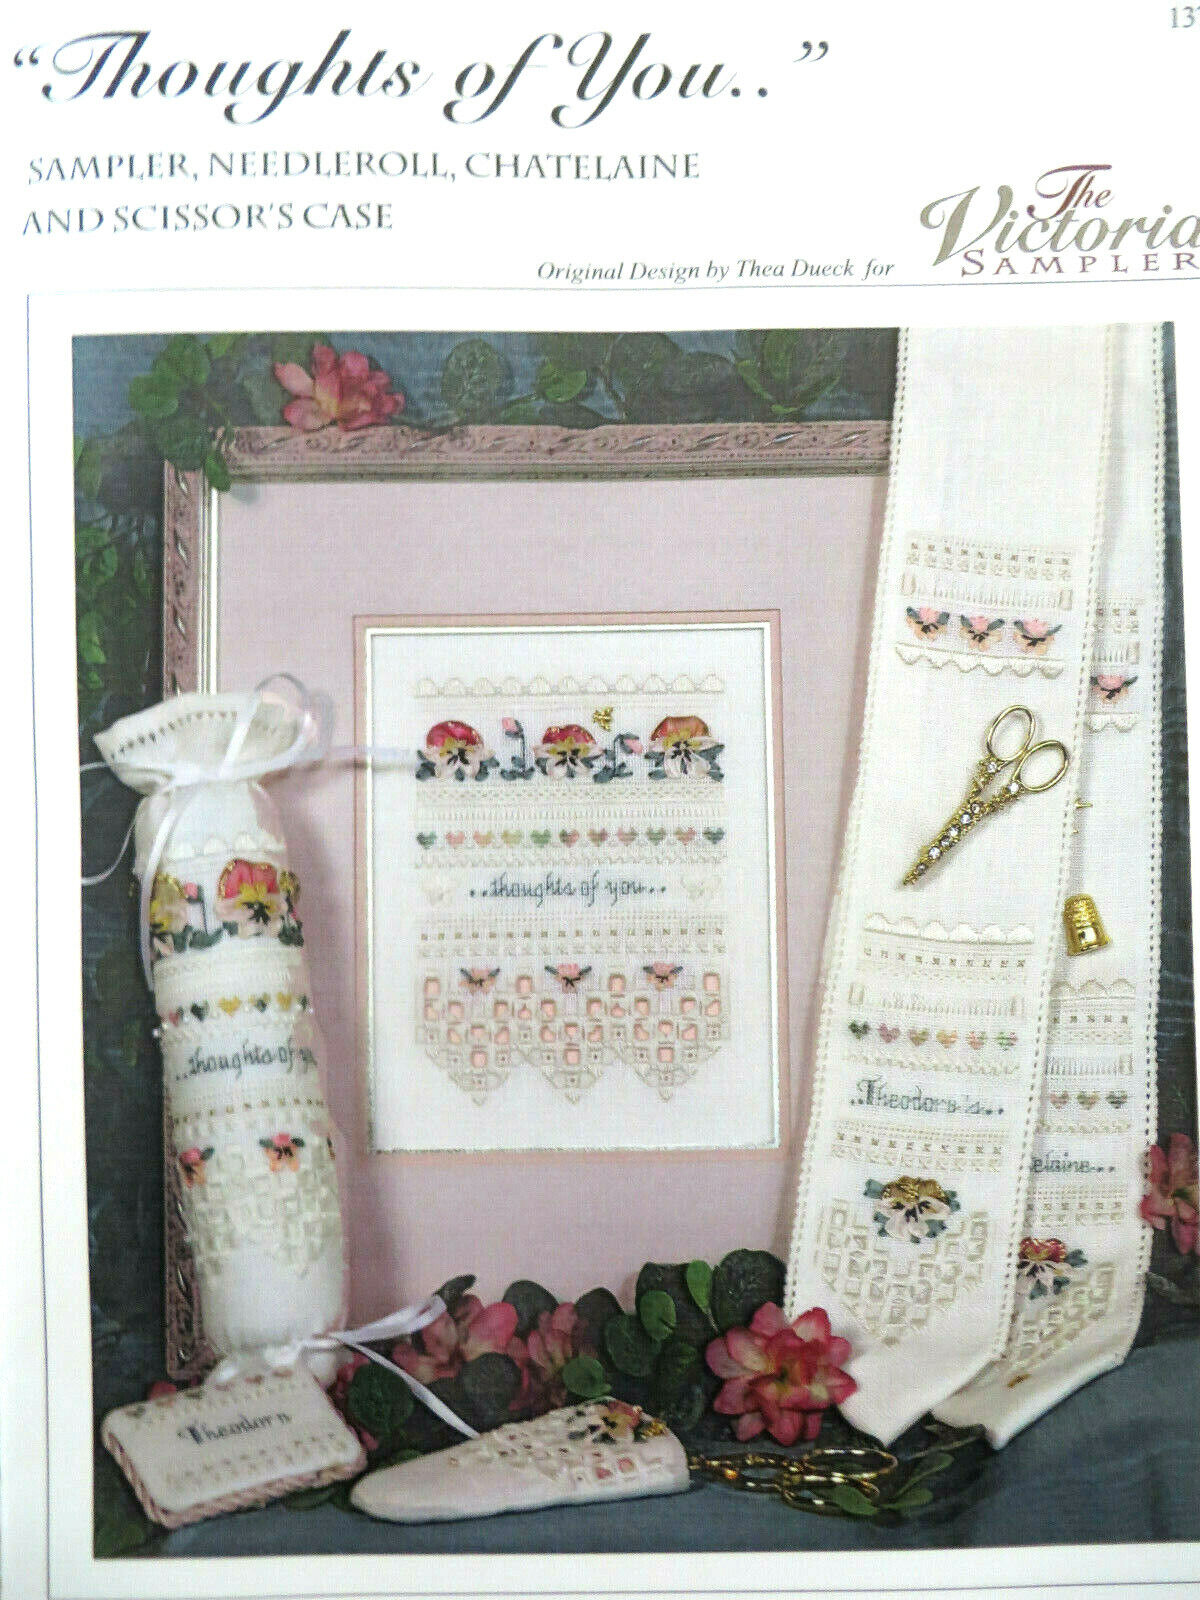 Victoria Sampler "THOUGHTS OF YOU" Sampler CHART + Accessory Pack + 32 Ct. Linen